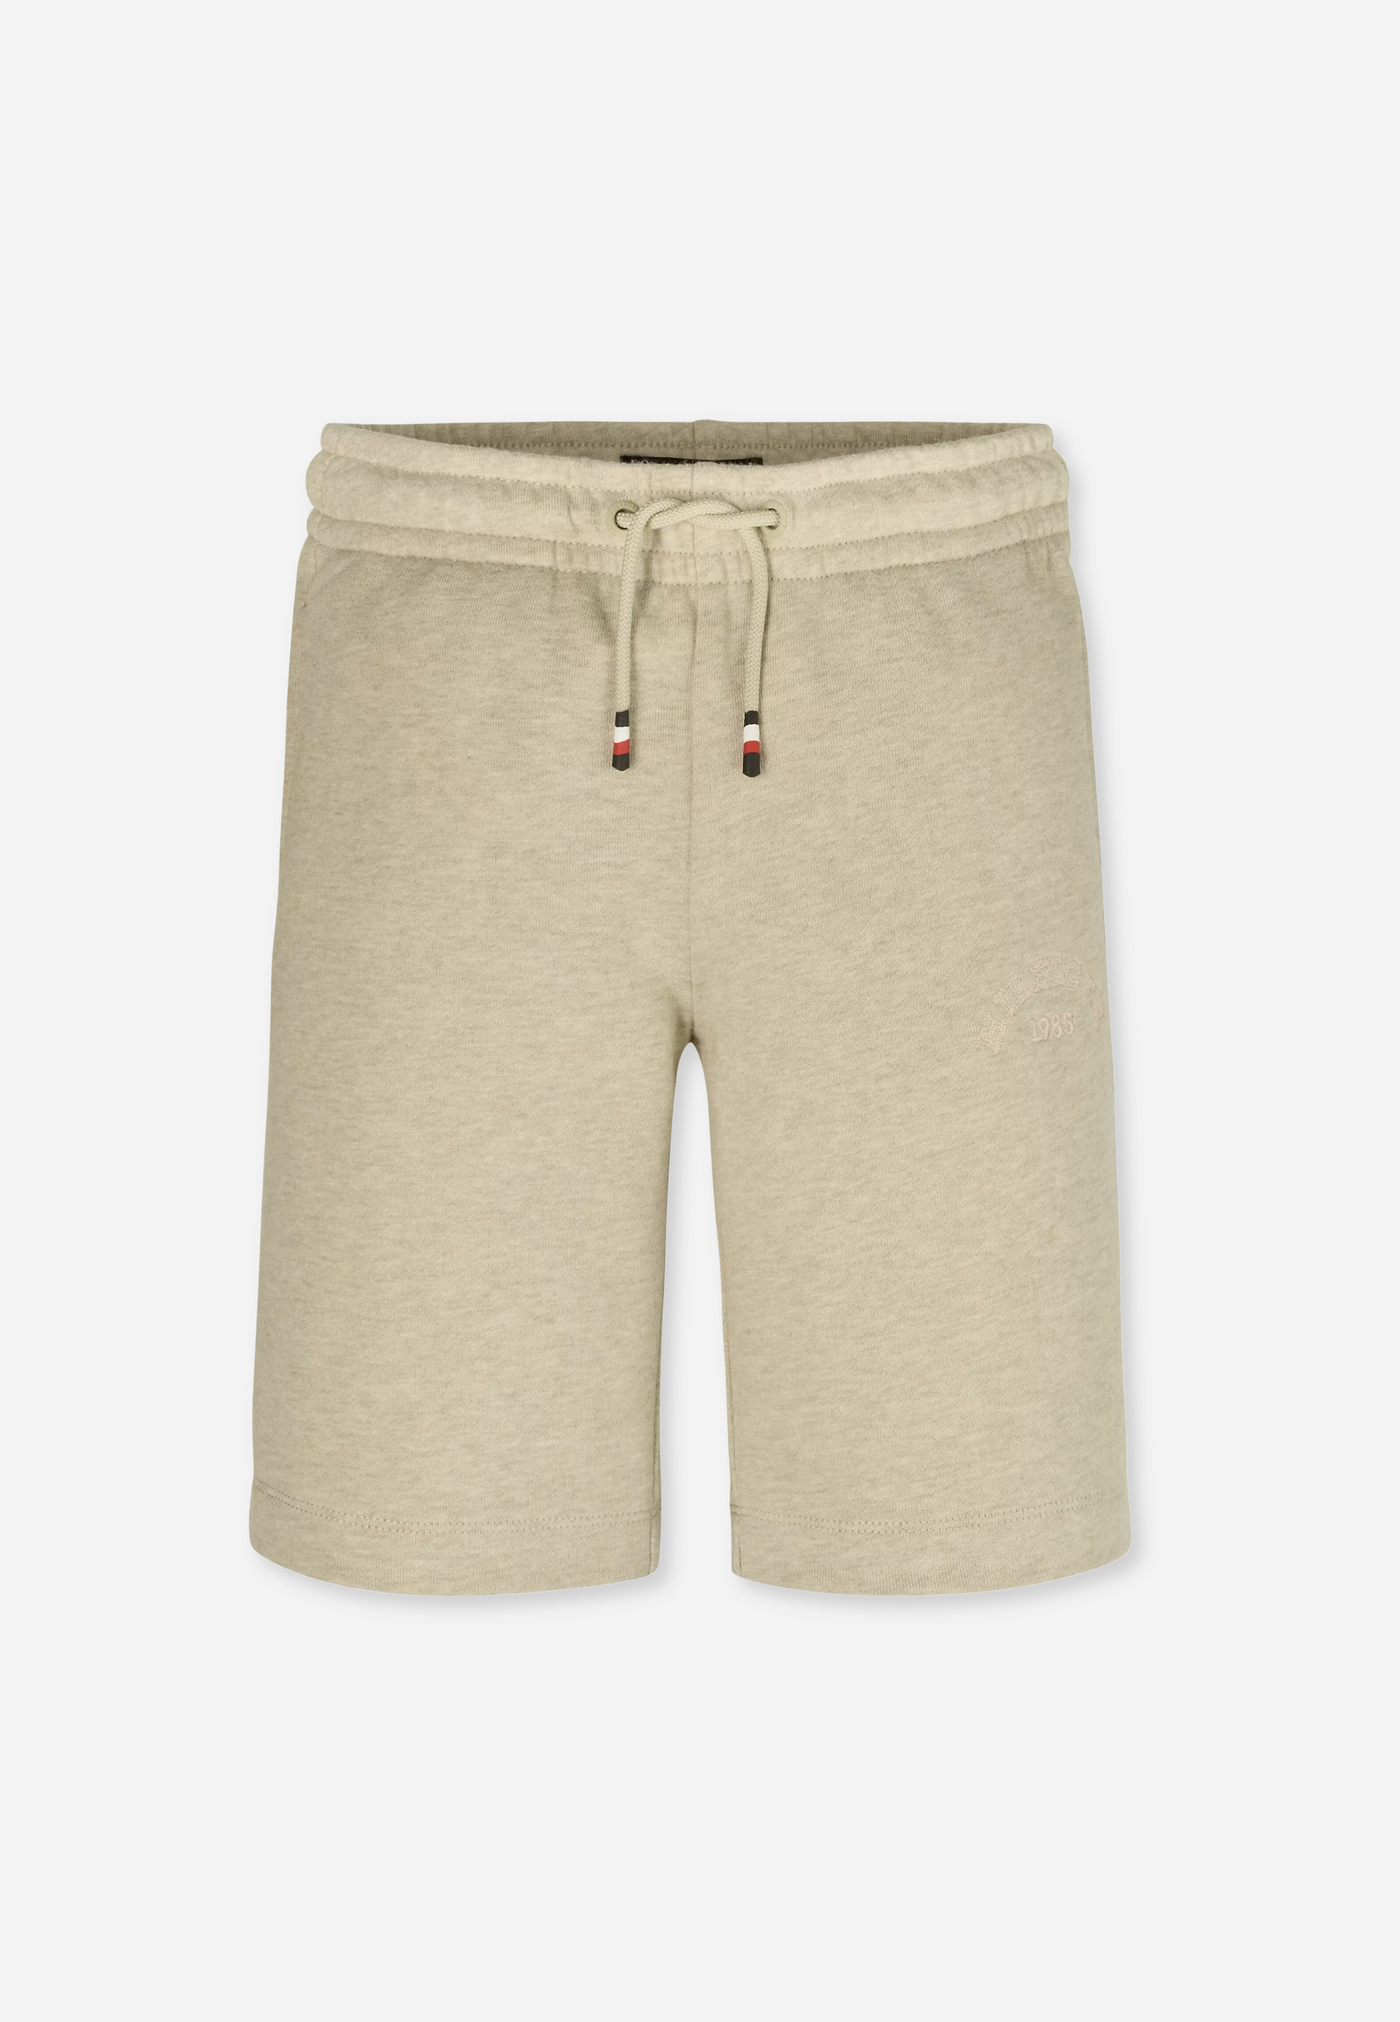 MONOTYPE SHORTS - FADED OLIVE HEATHER